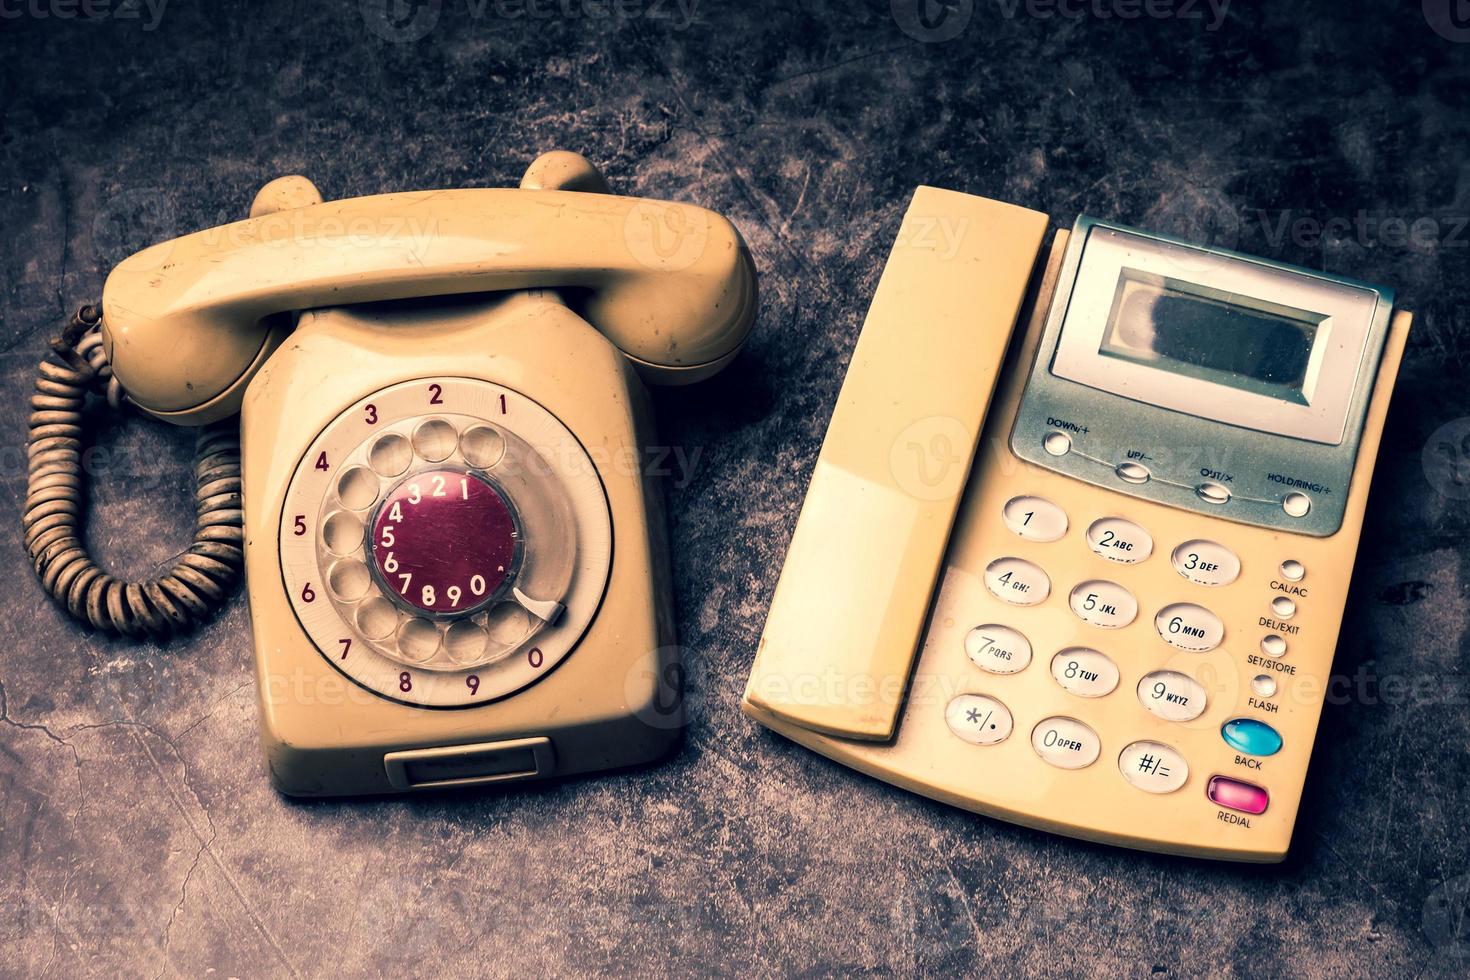 An old telephone with rotary dial and a landline on a grunge background. photo